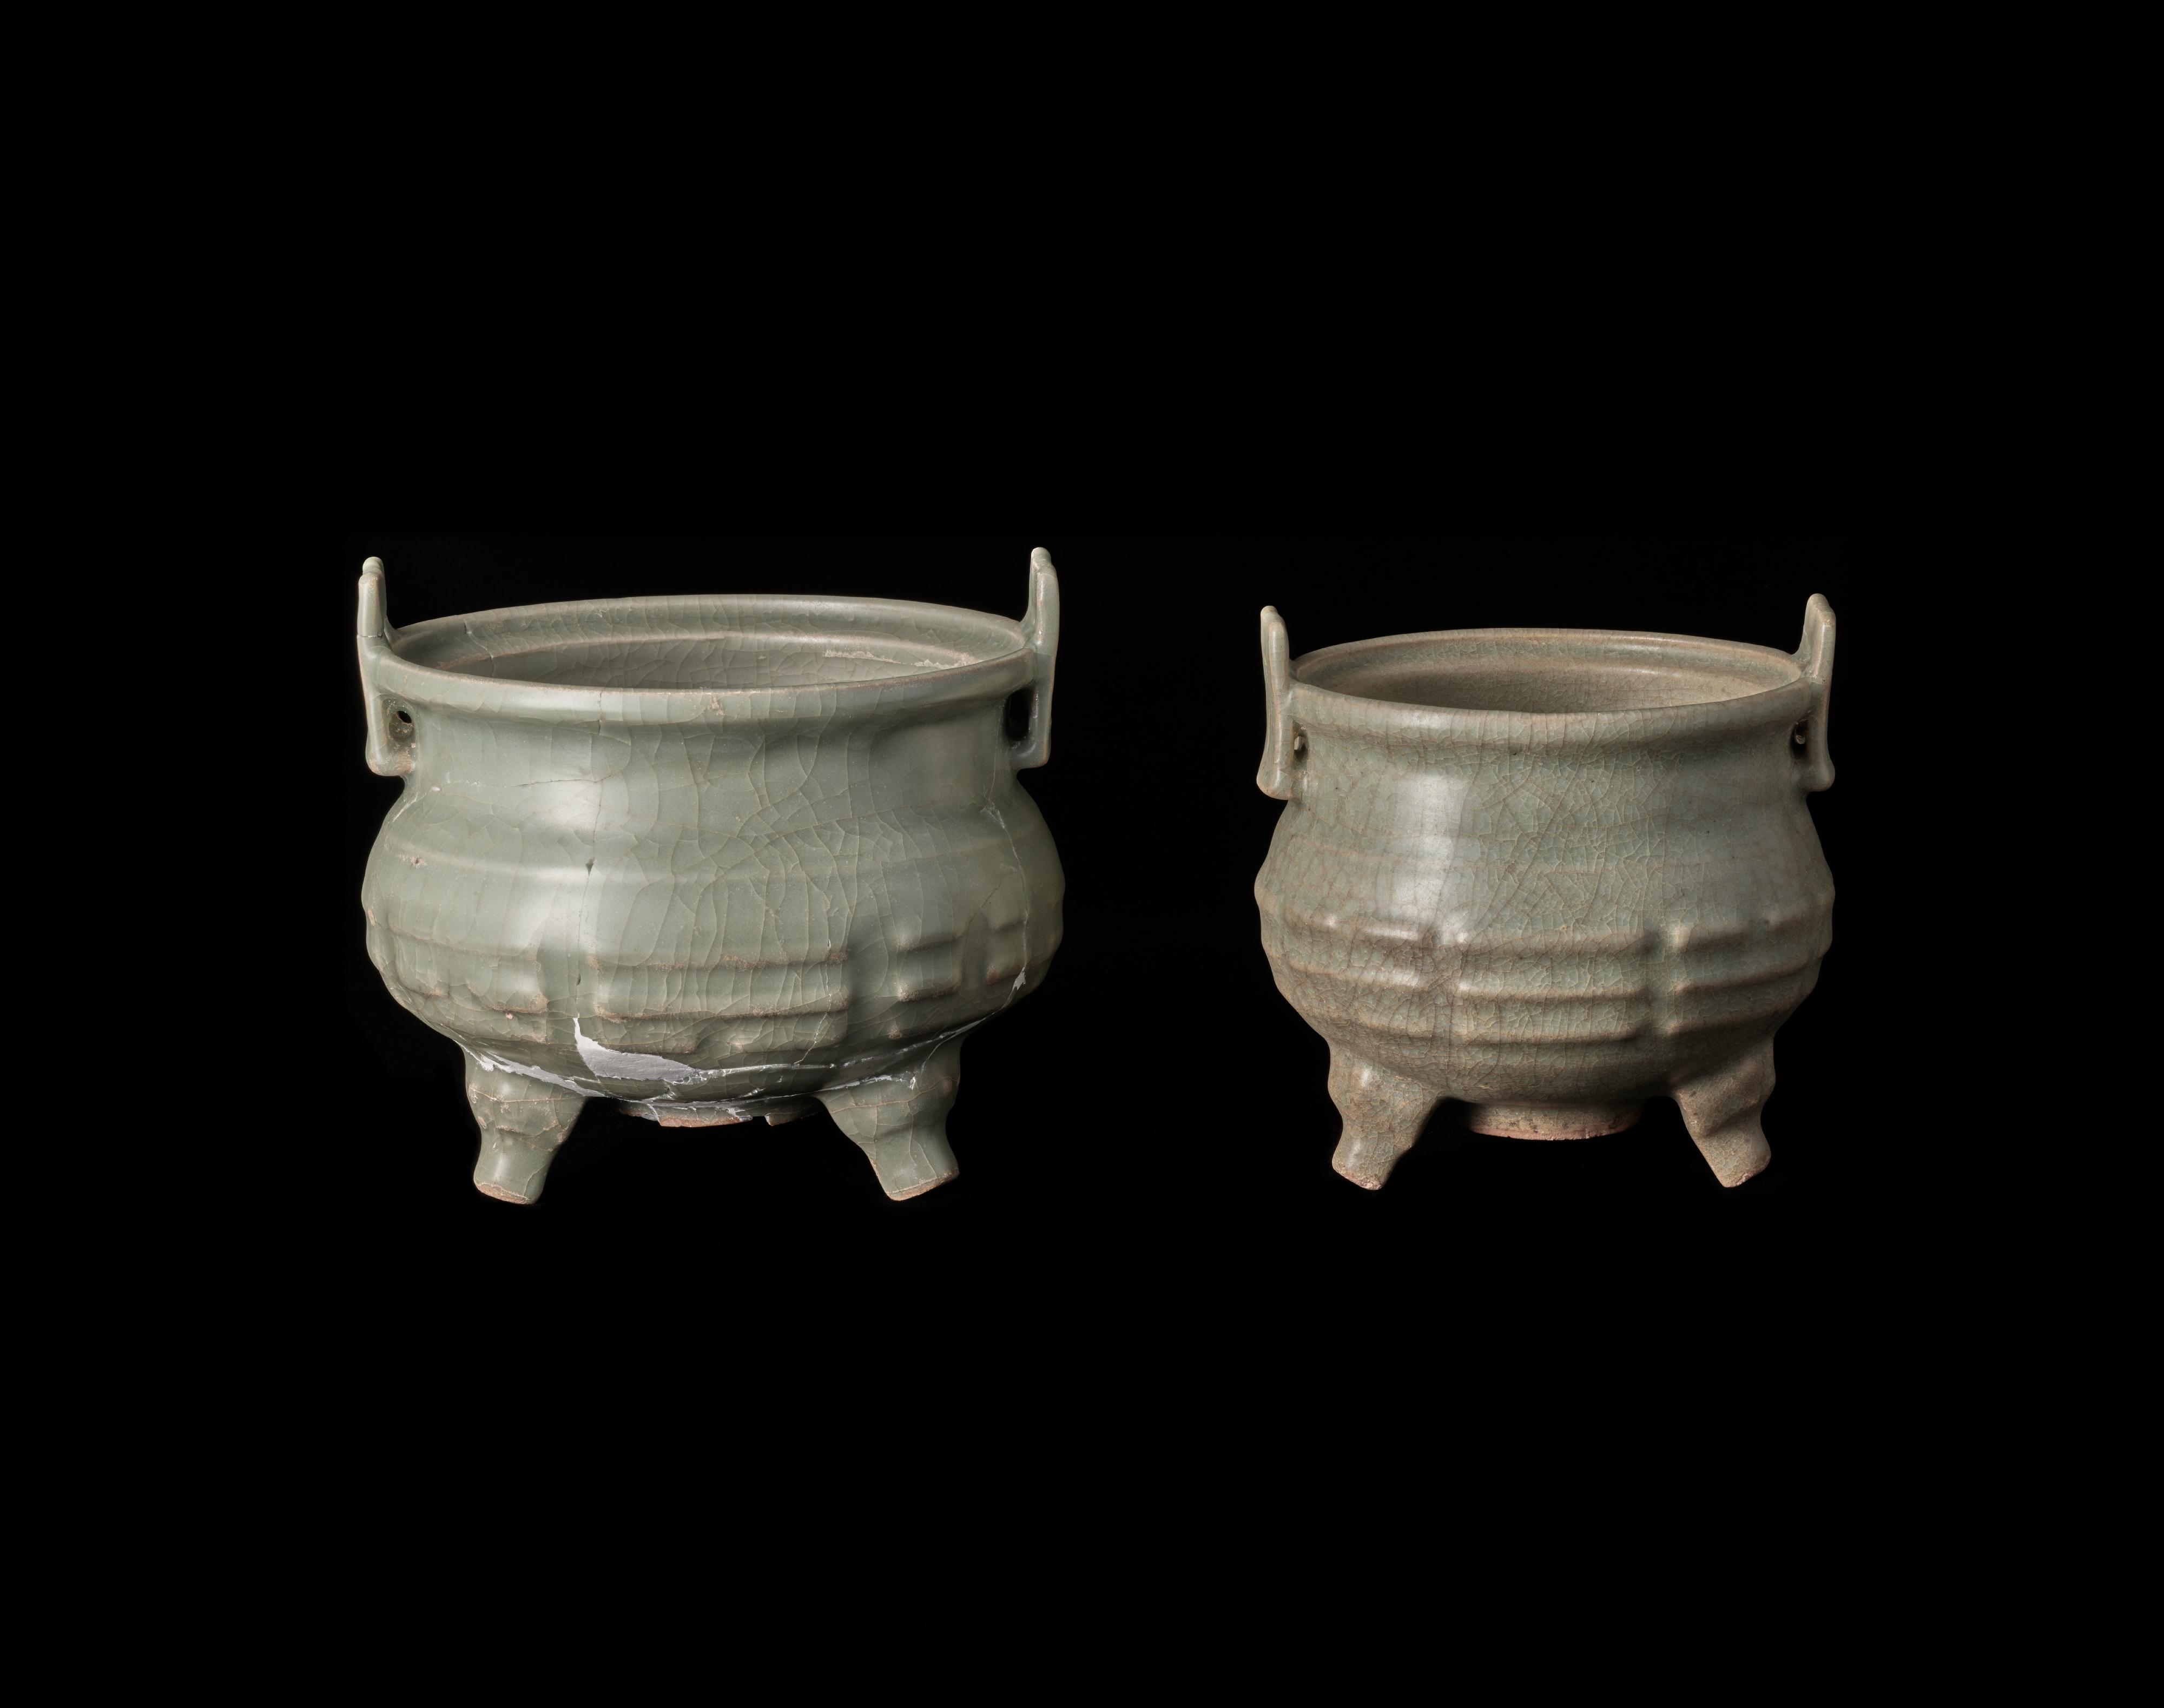 Curated by the Antiquities and Monuments Office, the Treasures from Scared Hill Exhibition at MTR Sung Wong Toi Station, upon completion of renewal, will reopen tomorrow (March 22). One of the exhibit highlights is a pair of celadon incense burners with an eight-trigrams pattern produced in Longquan kilns in Zhejiang. Since they were unearthed from a pit near a well, they may be related to the worship of the water-well deity.